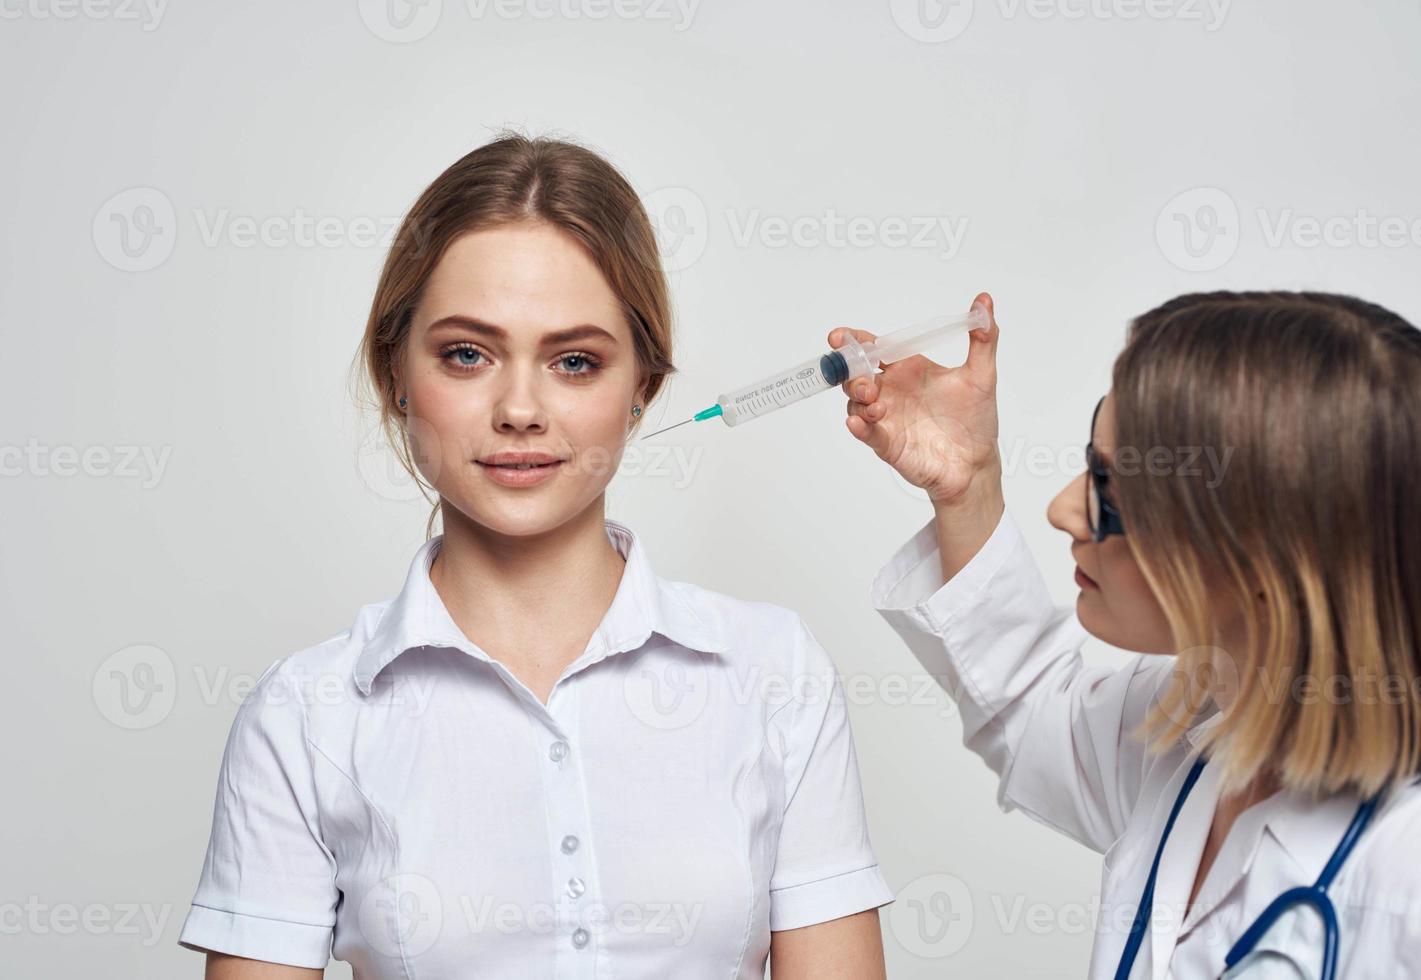 Female doctor shows the patient a syringe and a medical gown a stethoscope photo